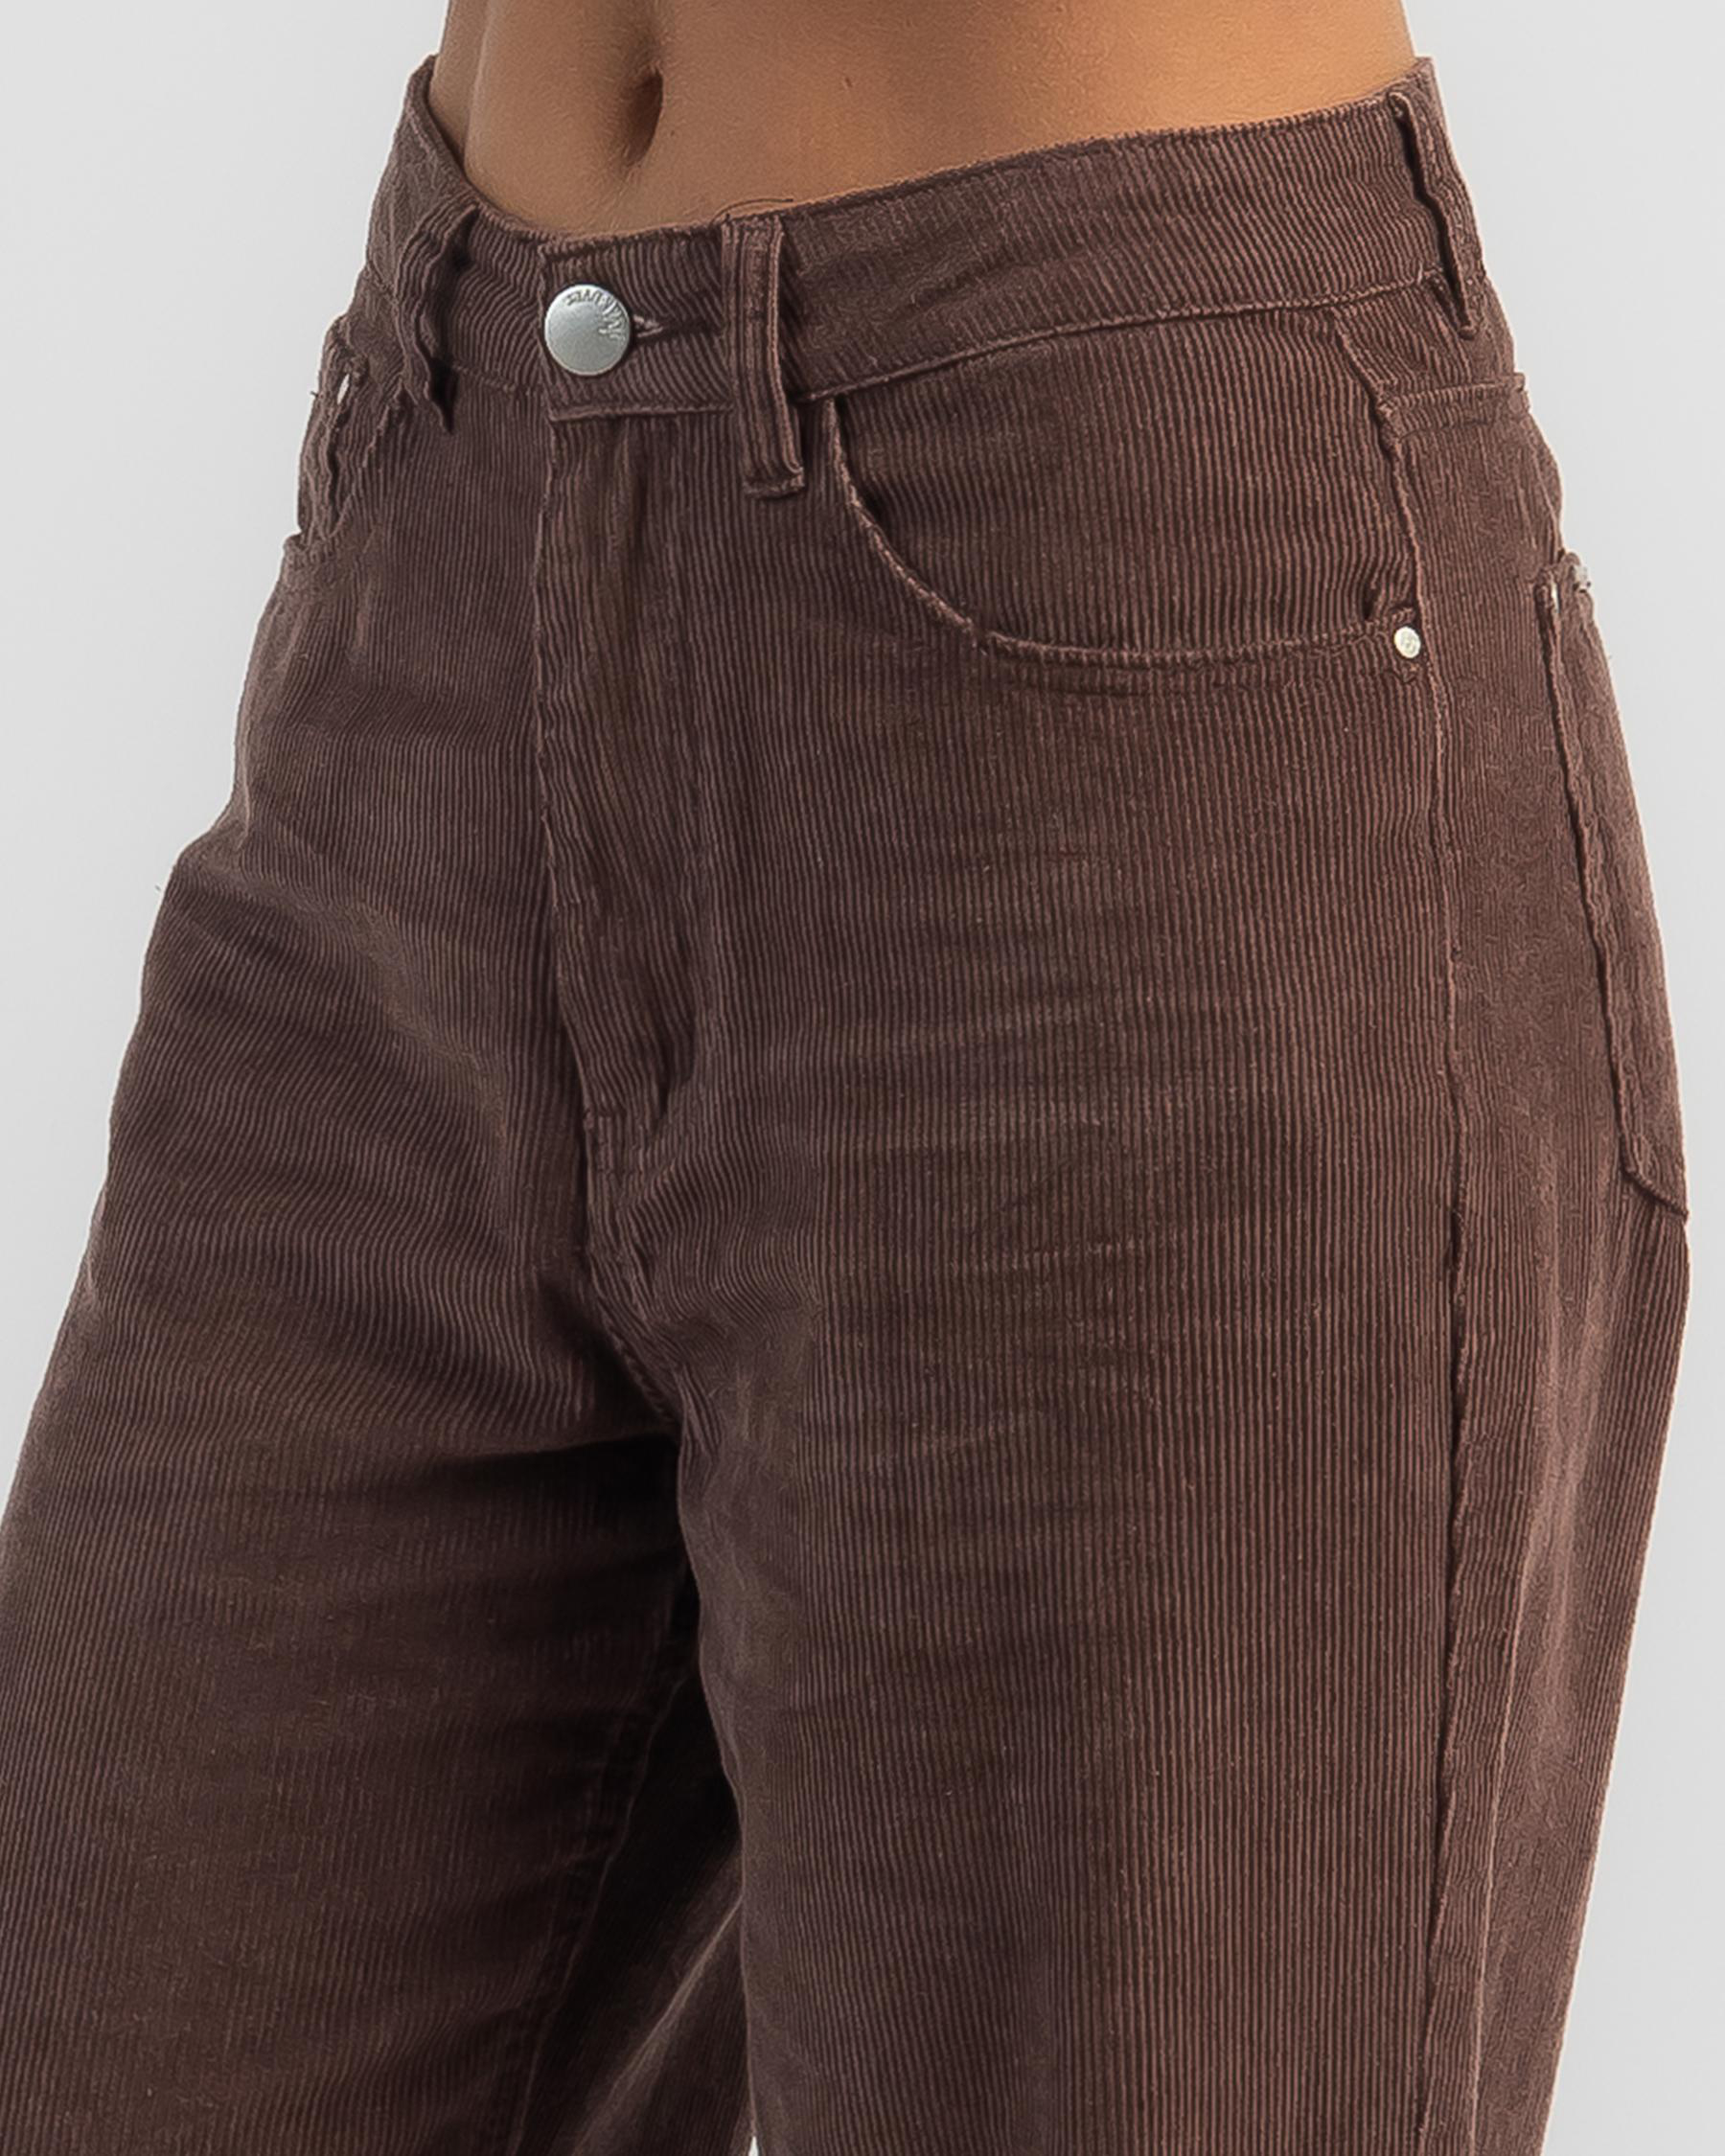 Ava And Ever Ramona Pants In Chocolate - Fast Shipping & Easy Returns ...